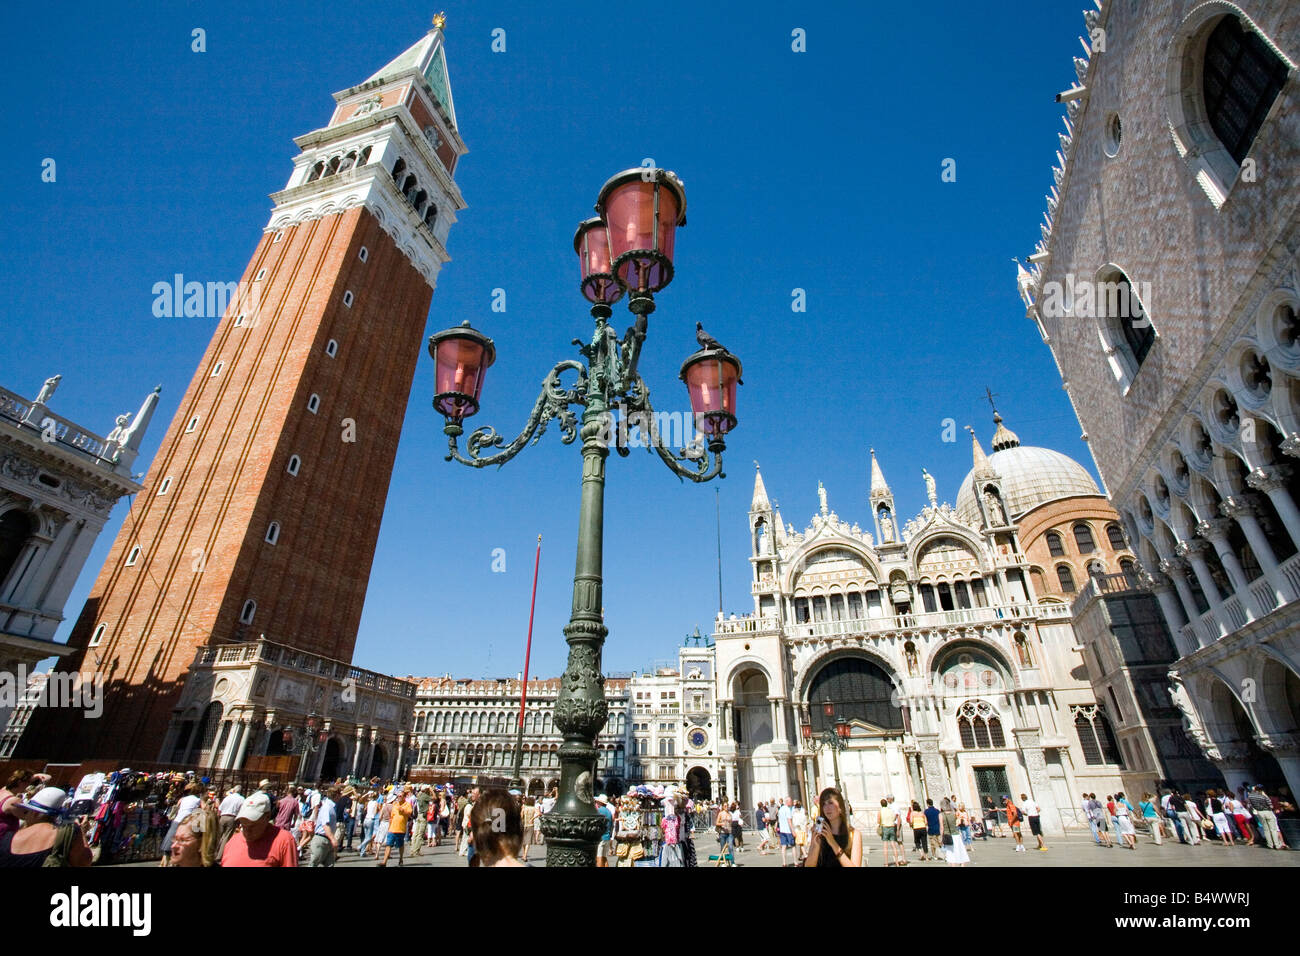 St Marks Square Piazza in Venice Italy Stock Photo